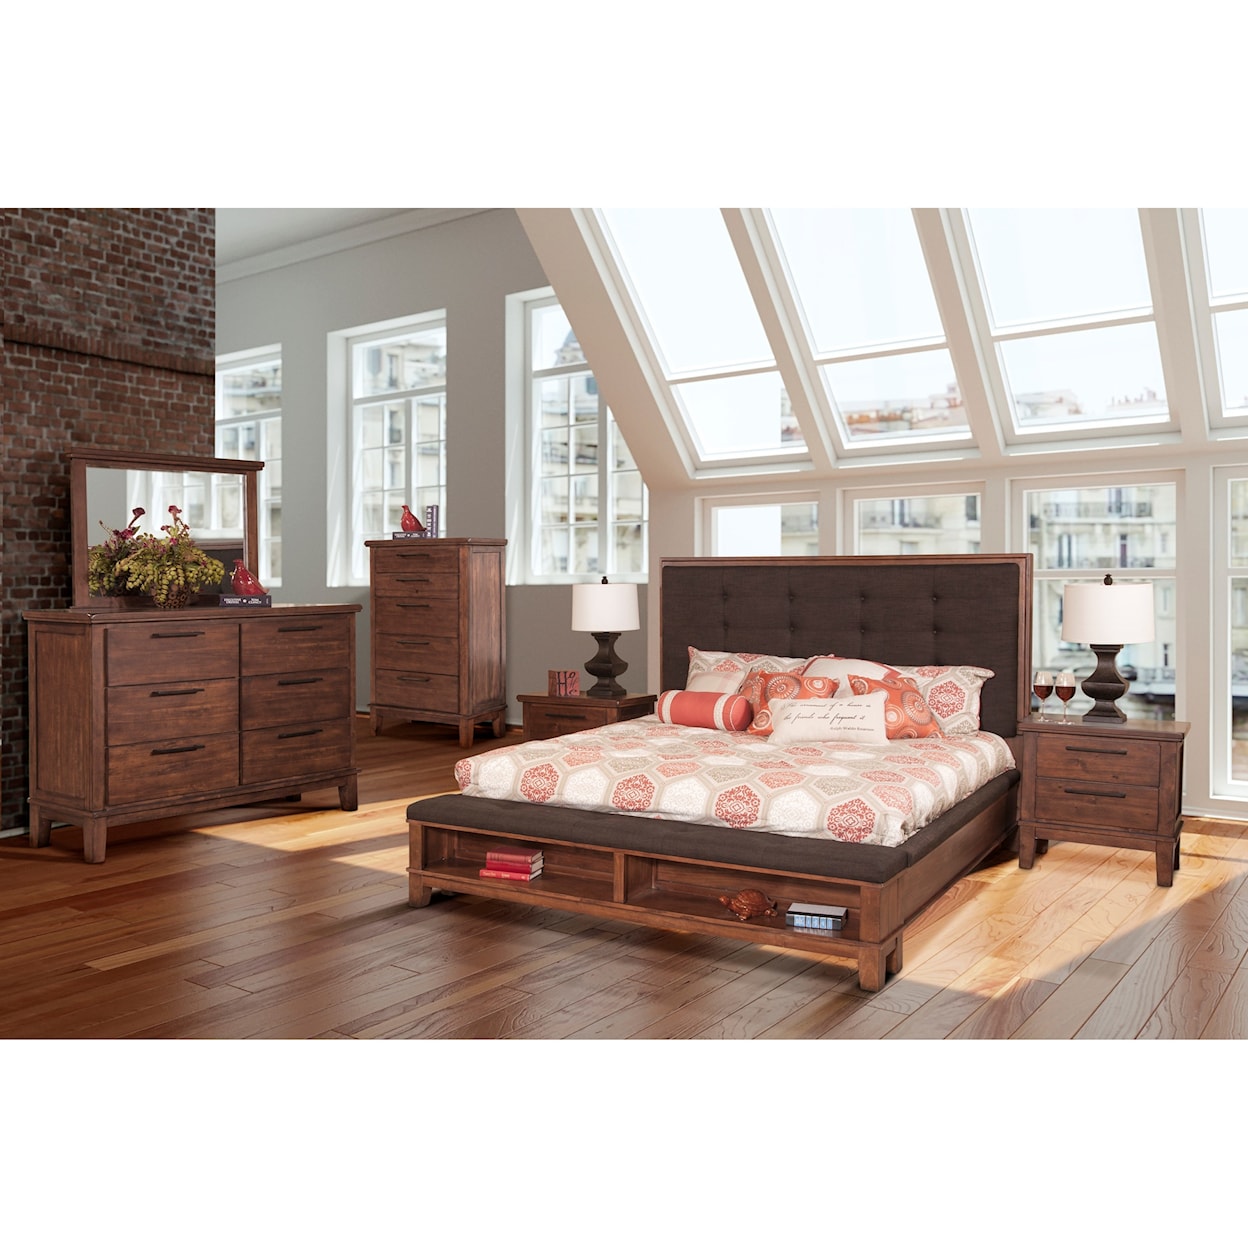 New Classic Cagney California King Bedroom Group